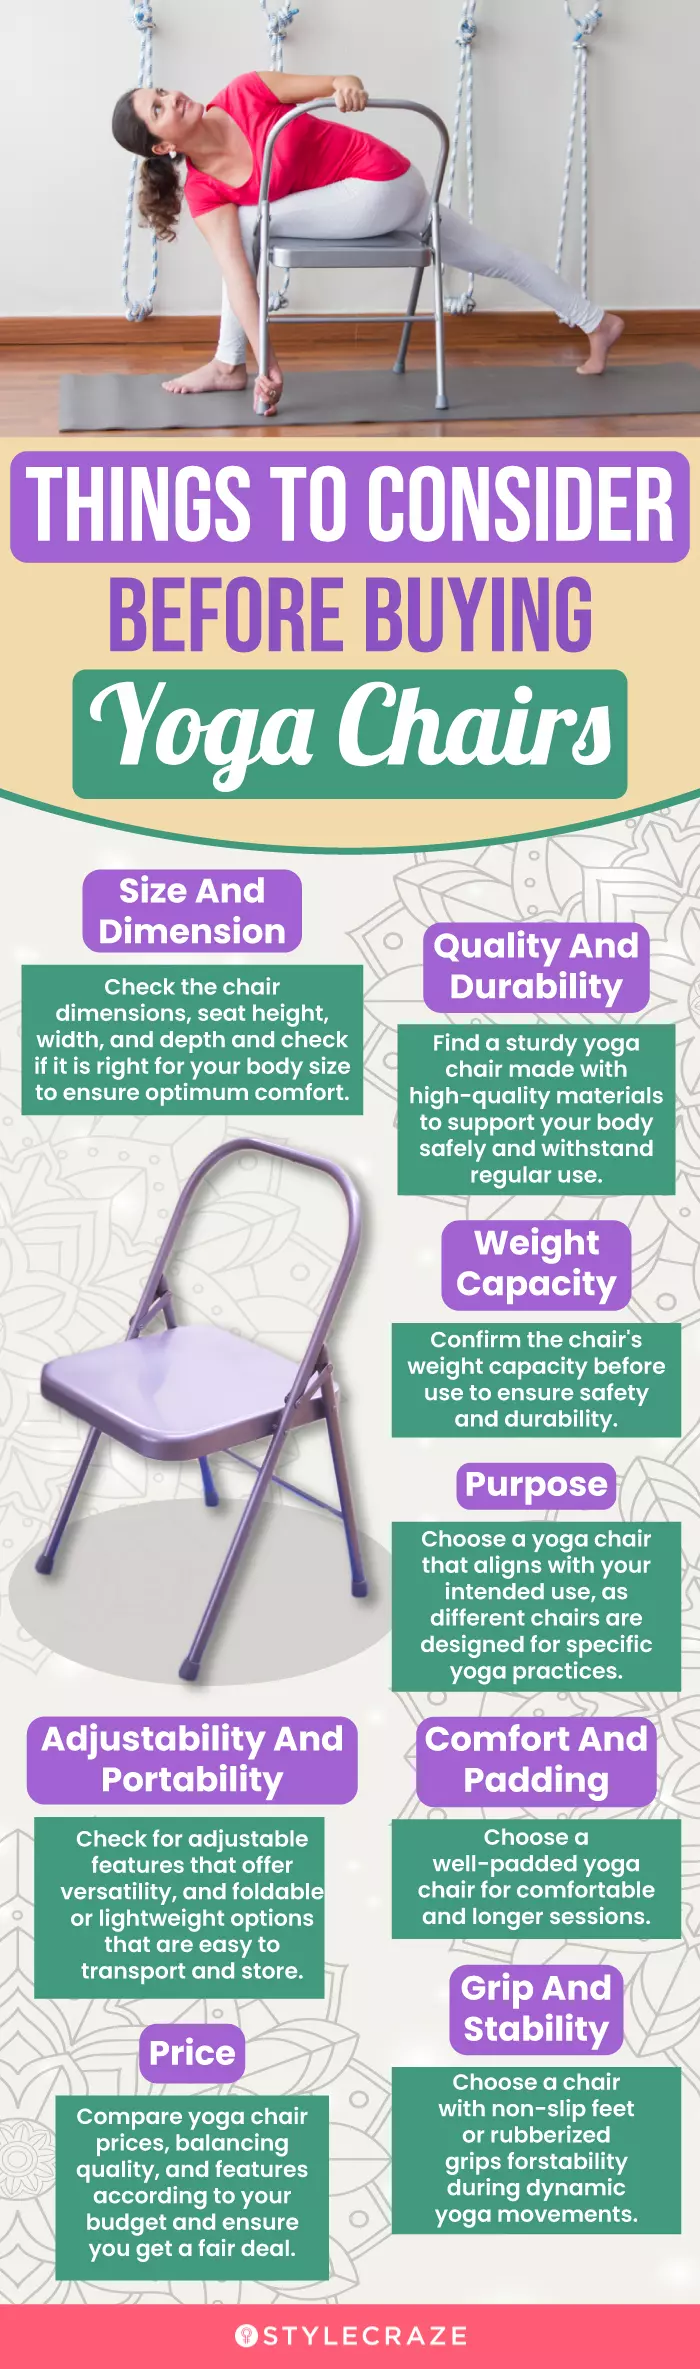 Things To Consider Before Buying Yoga Chairs (infographic)